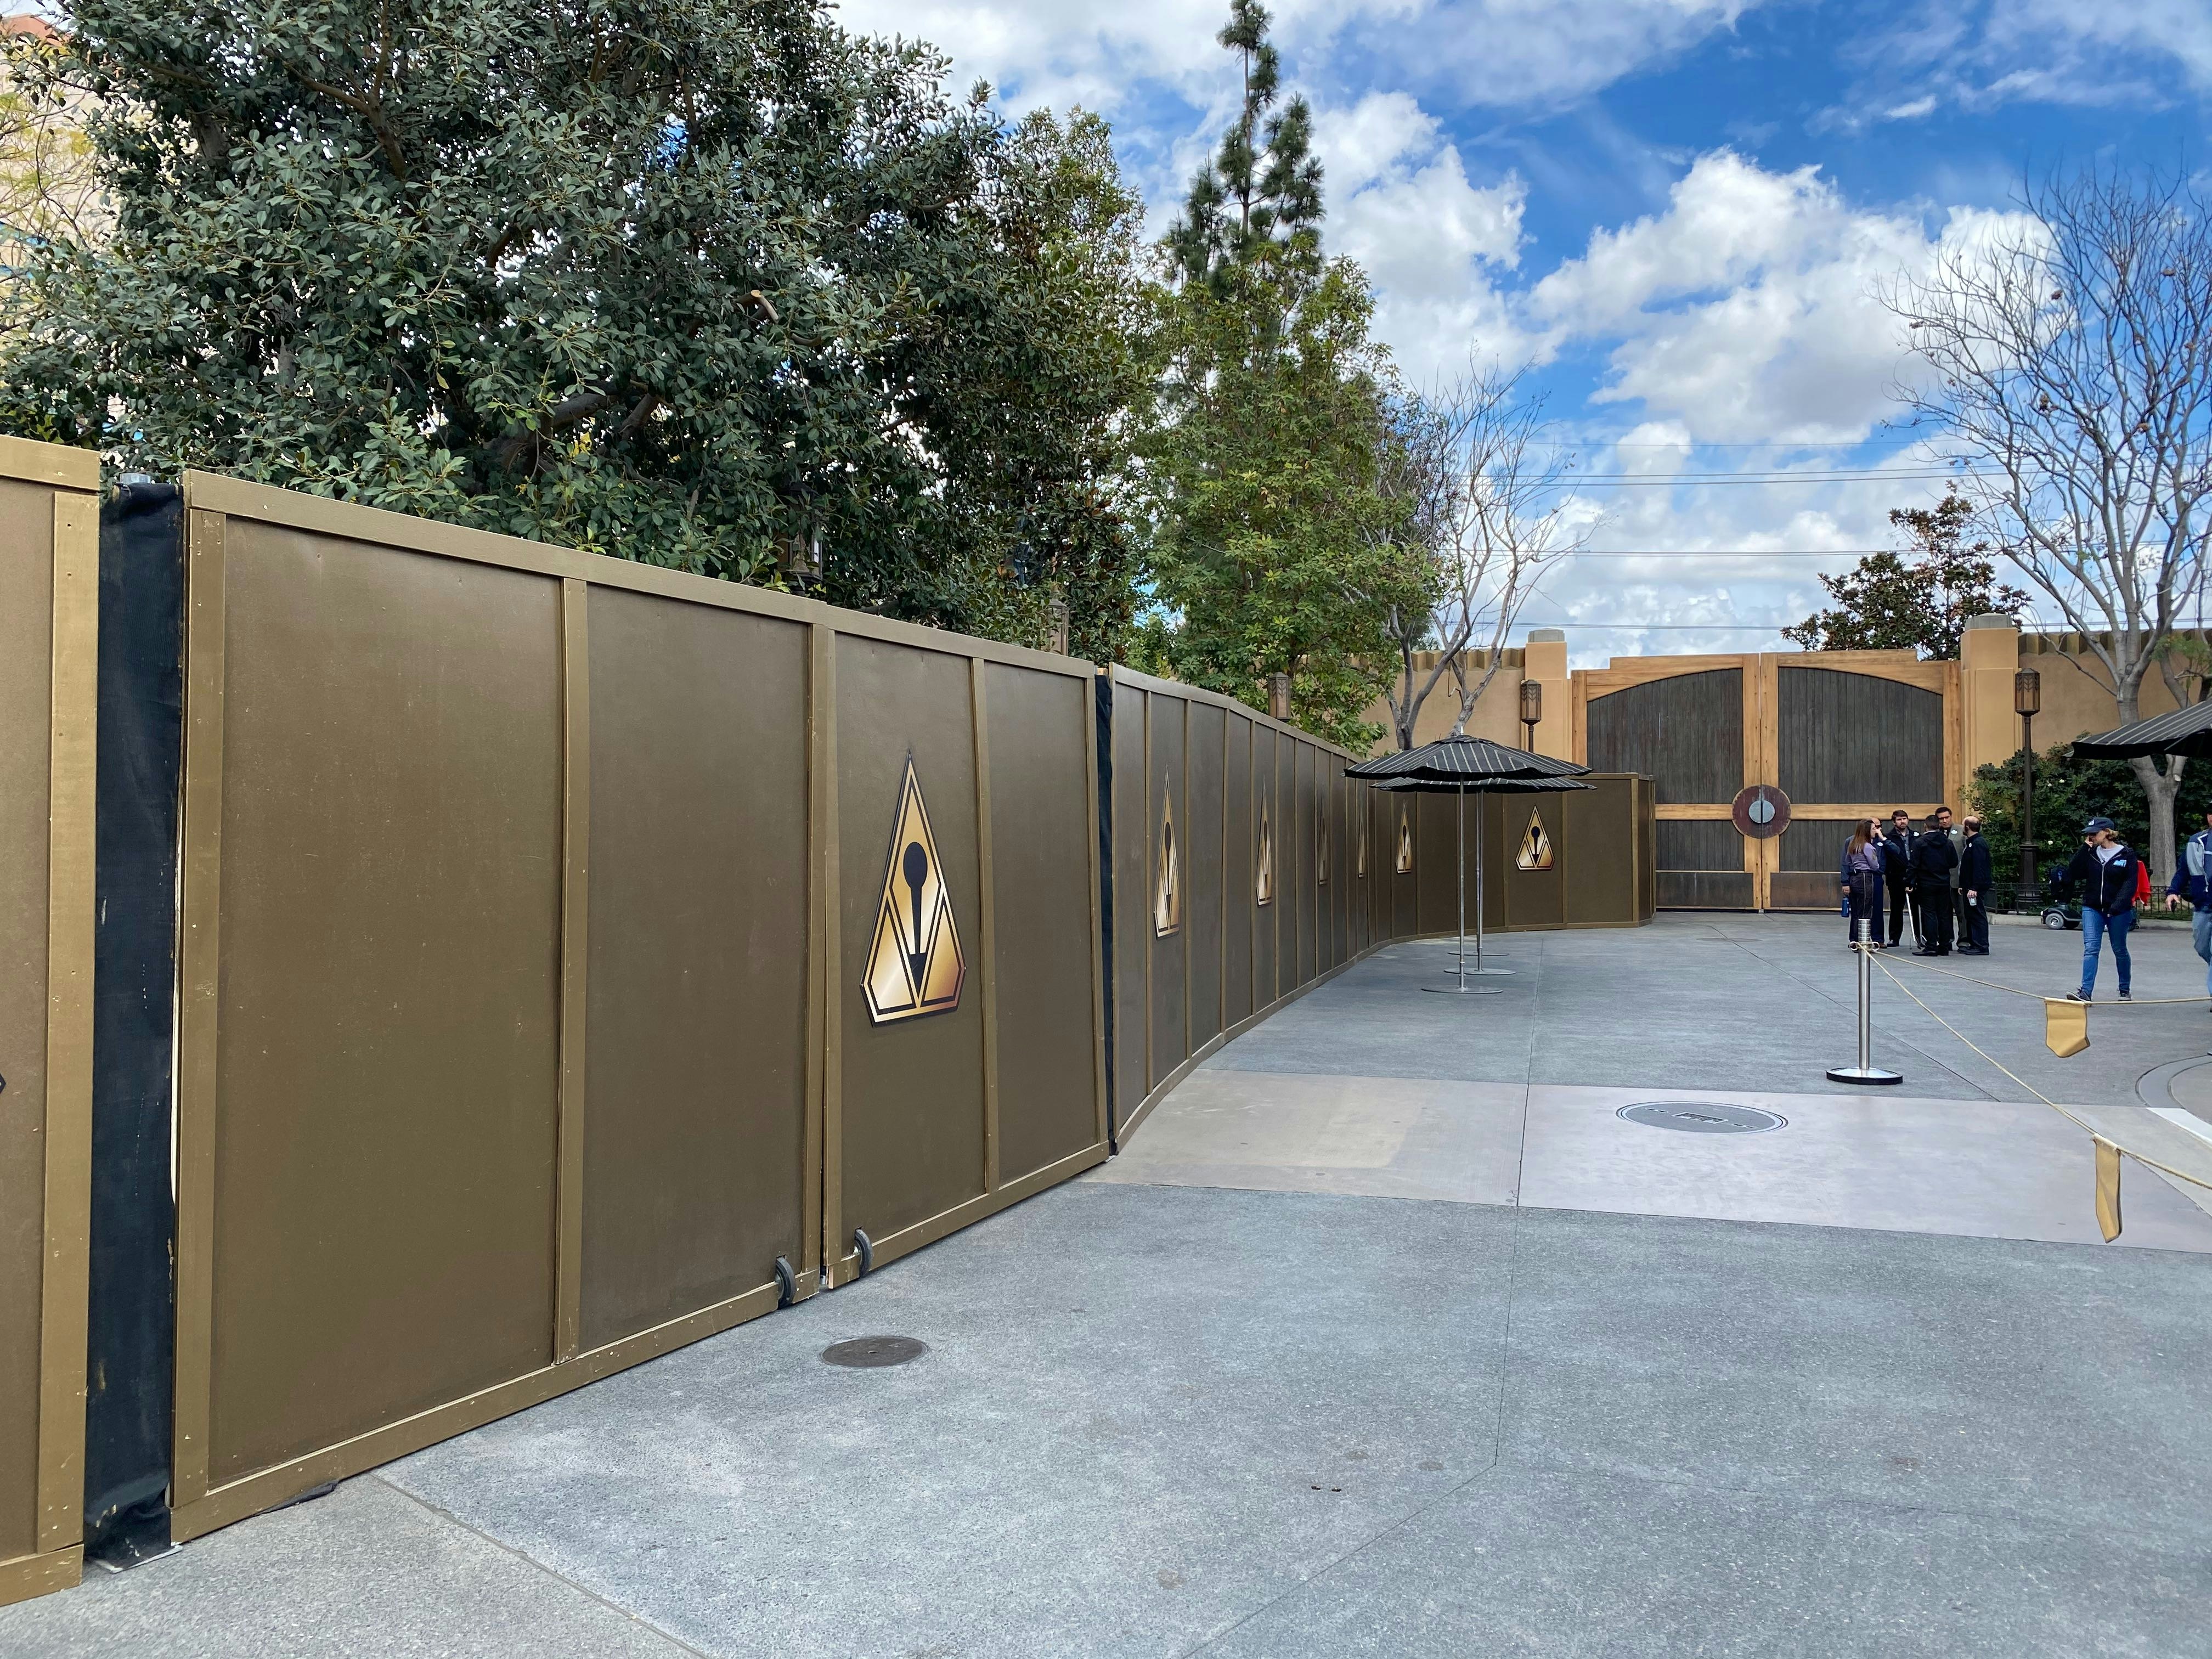 Construction Walls Go Up Outside of Guardians of the Galaxy - Mission: Breakout! at Disney California Adventure